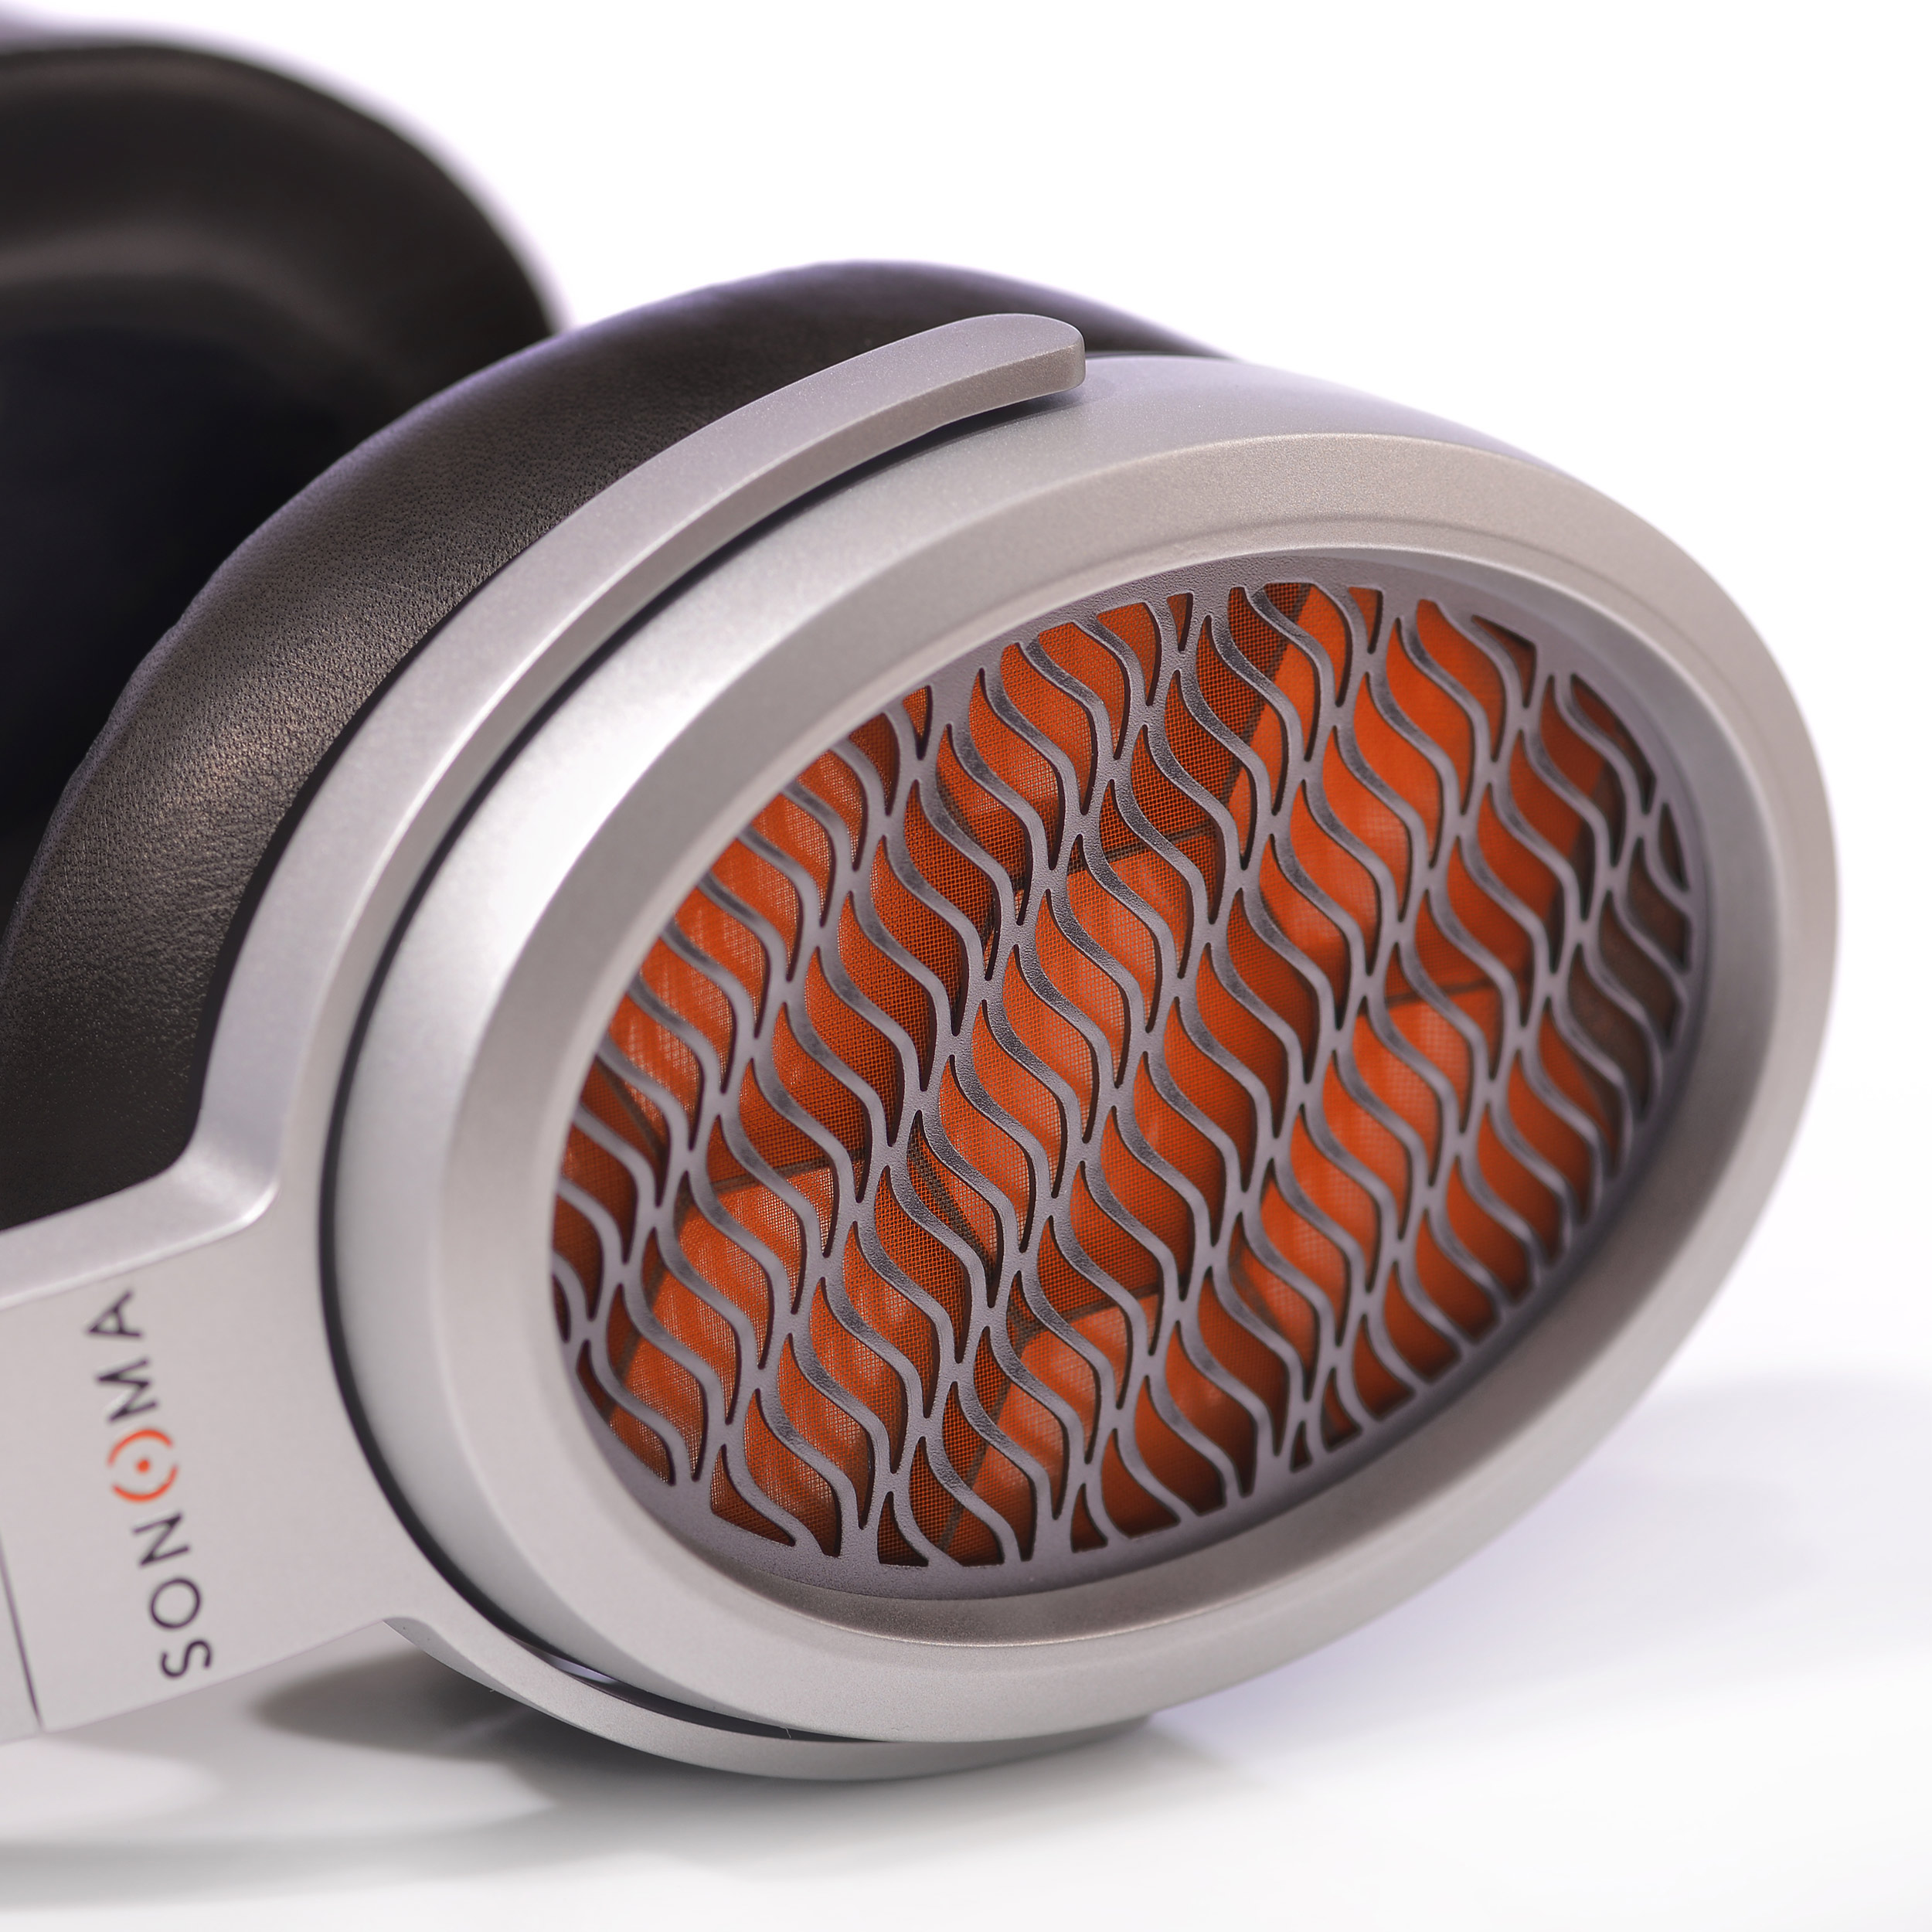 Oval shaped, injected magnesium silver earcups with orange honeycomb HPEL visible through a wavy metal mesh